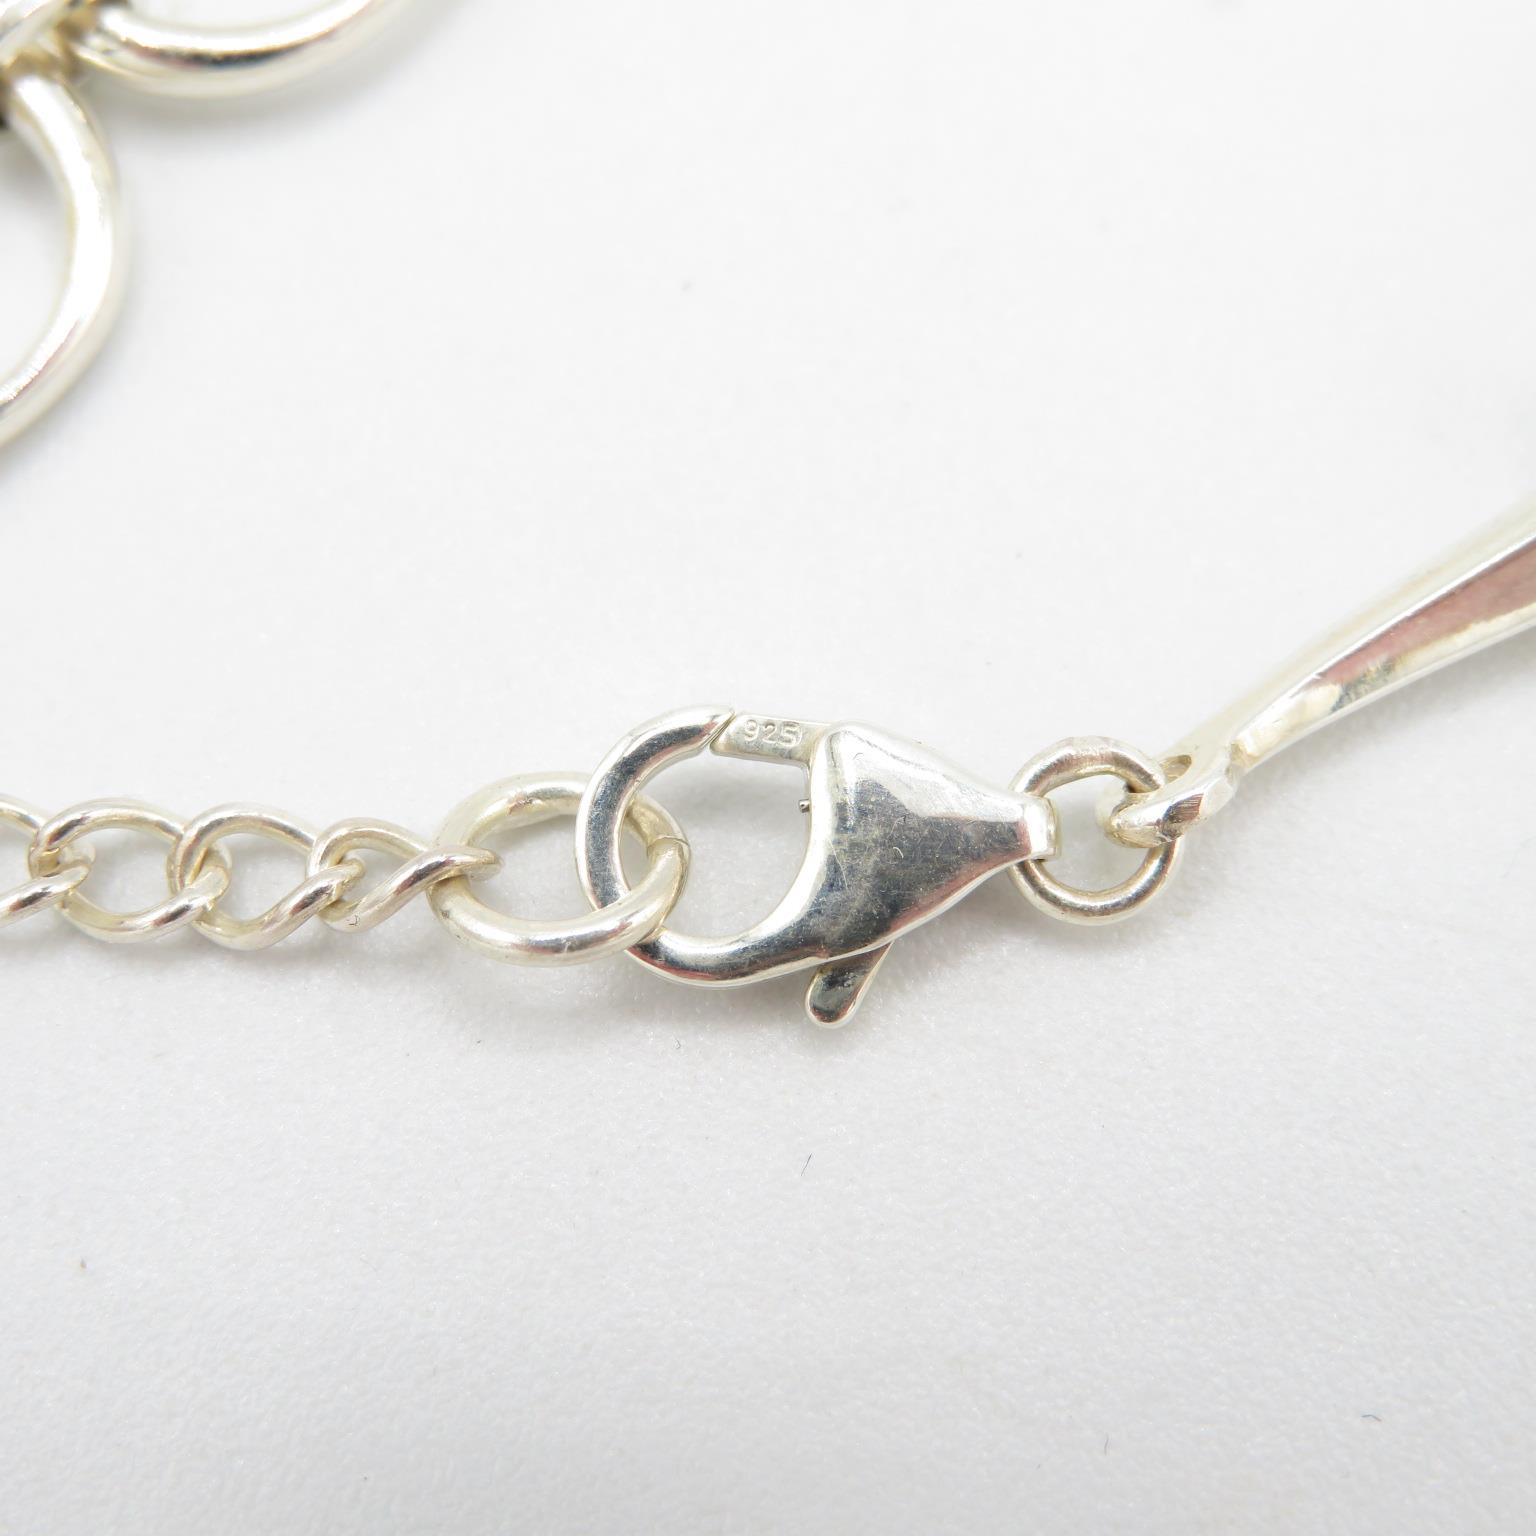 HM 925 Sterling Silver Stirrup Link design necklace in excellent condition (51.5g) length 44cm - Image 5 of 5